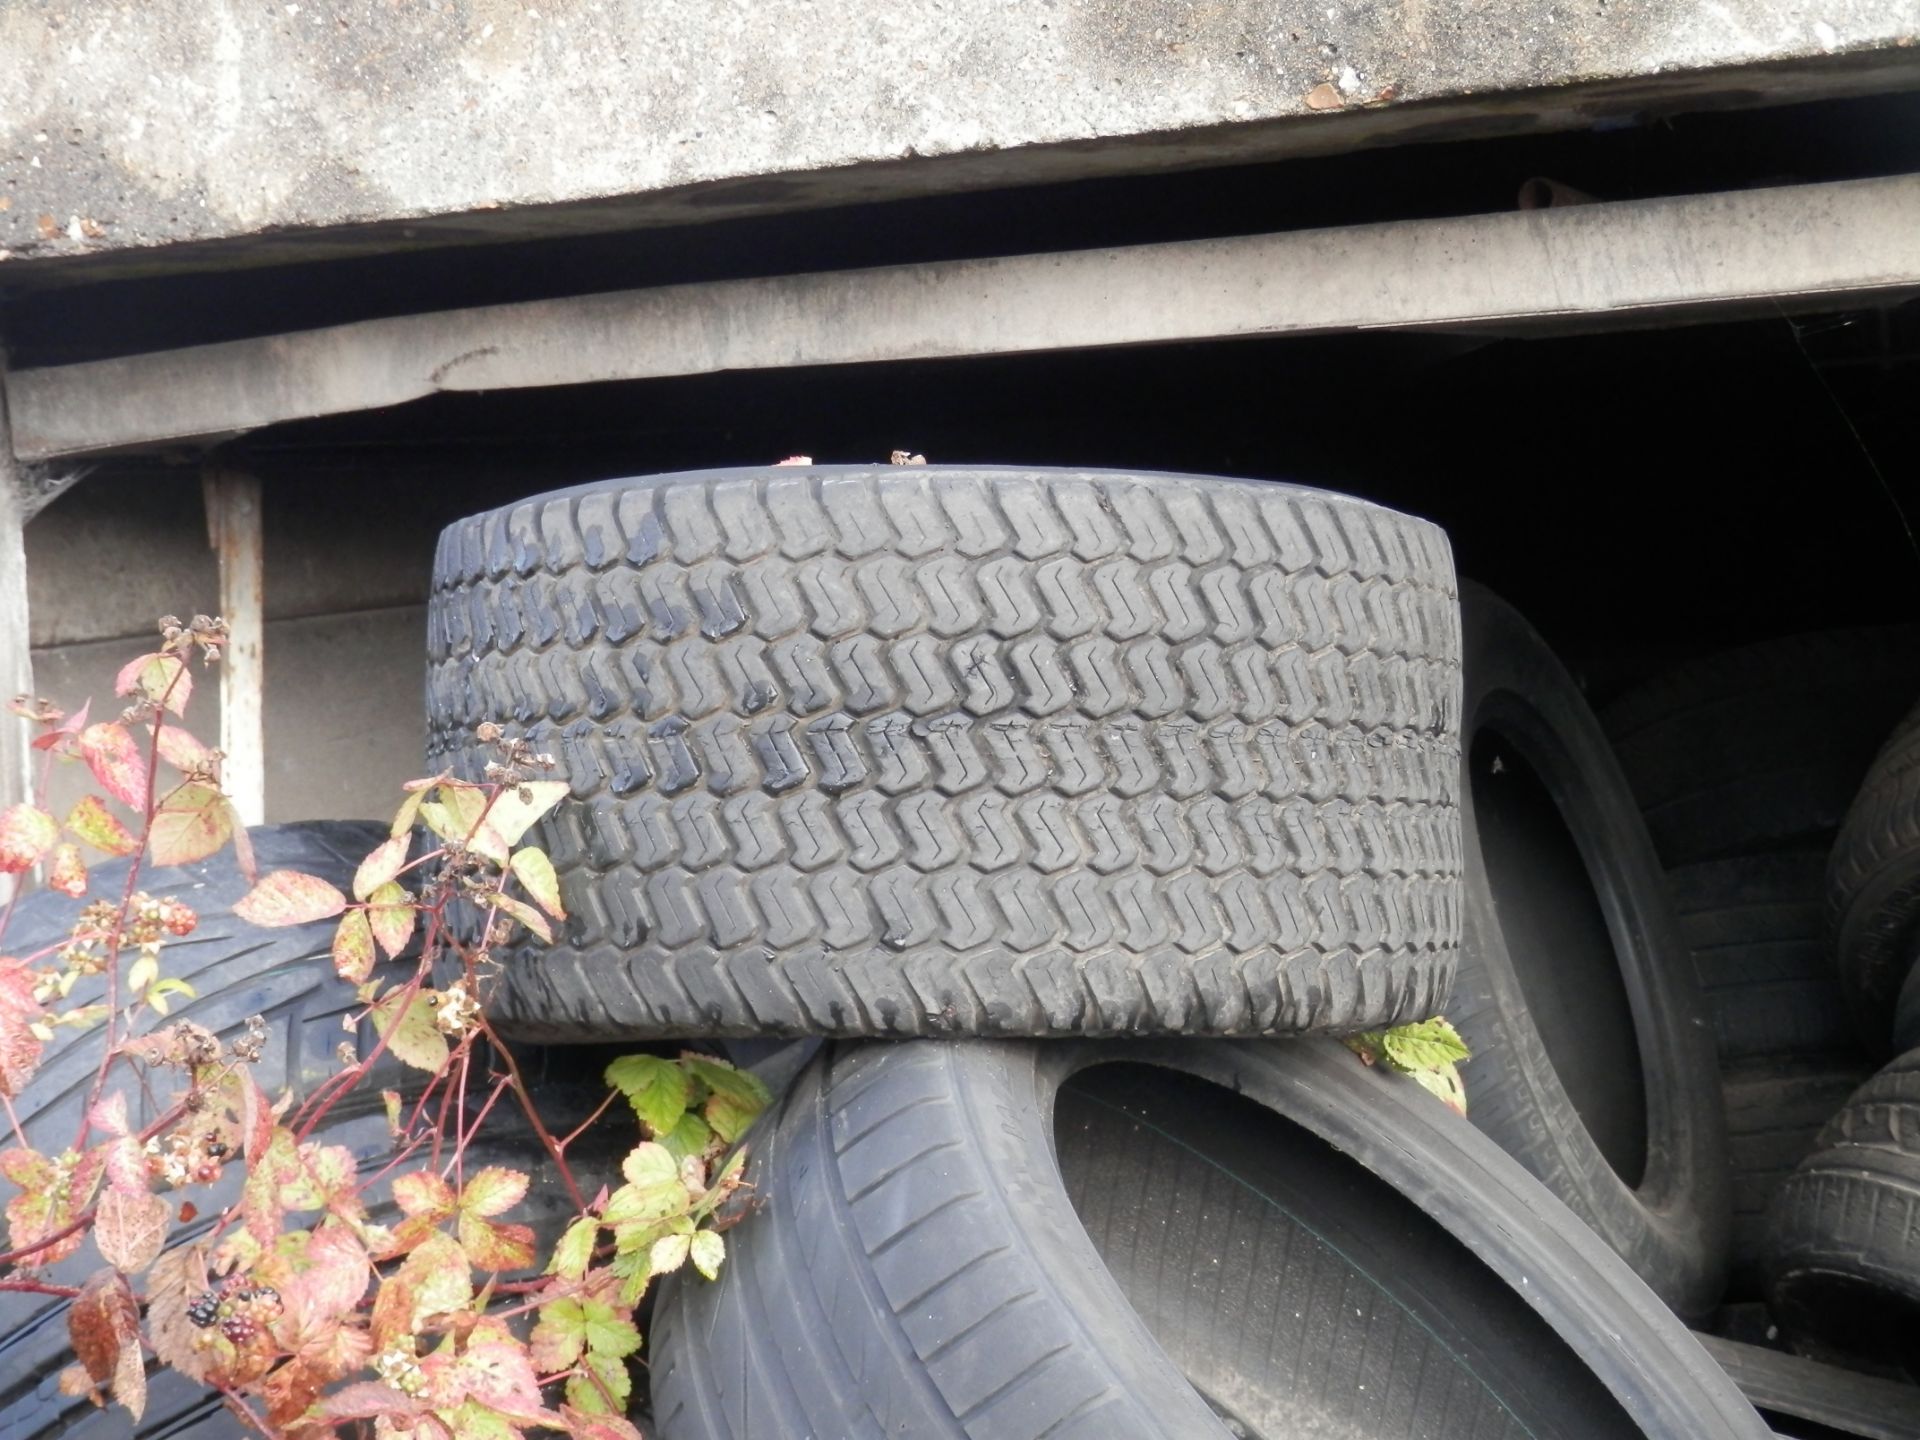 3 CAR GARAGES FULL OF USED, PART WORN TYRES. ASSORTED FROM CAR TO LORRY TYRES. POSSIBLY 800+ £10 !! - Image 7 of 8